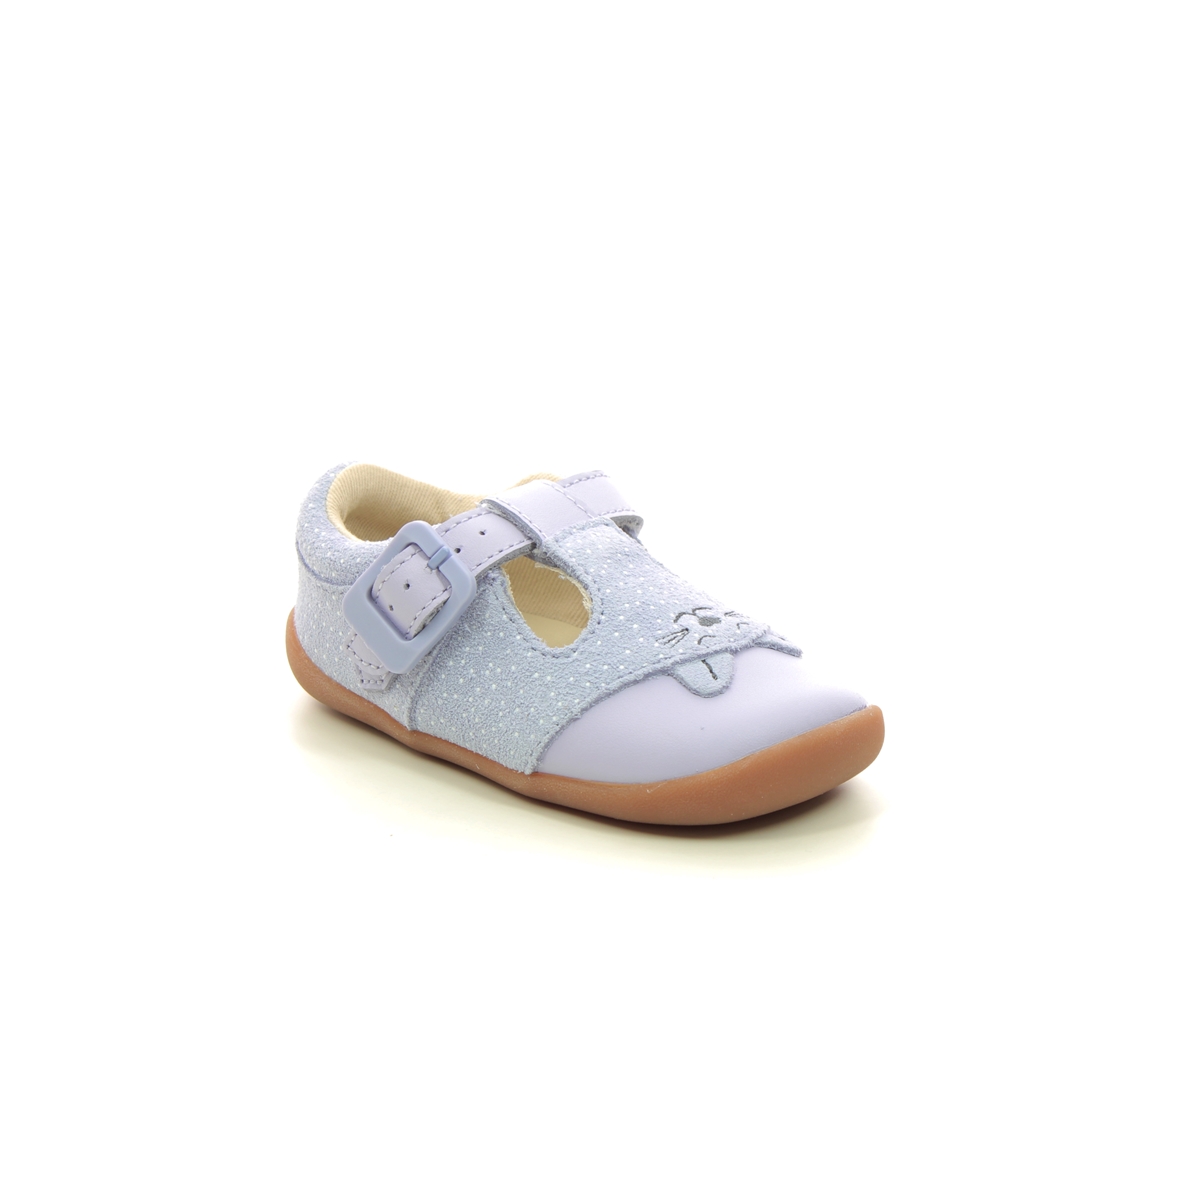 Clarks Roamer Cub T Lilac Kids girls first and baby shoes 7230-97G in a Plain Leather in Size 2.5